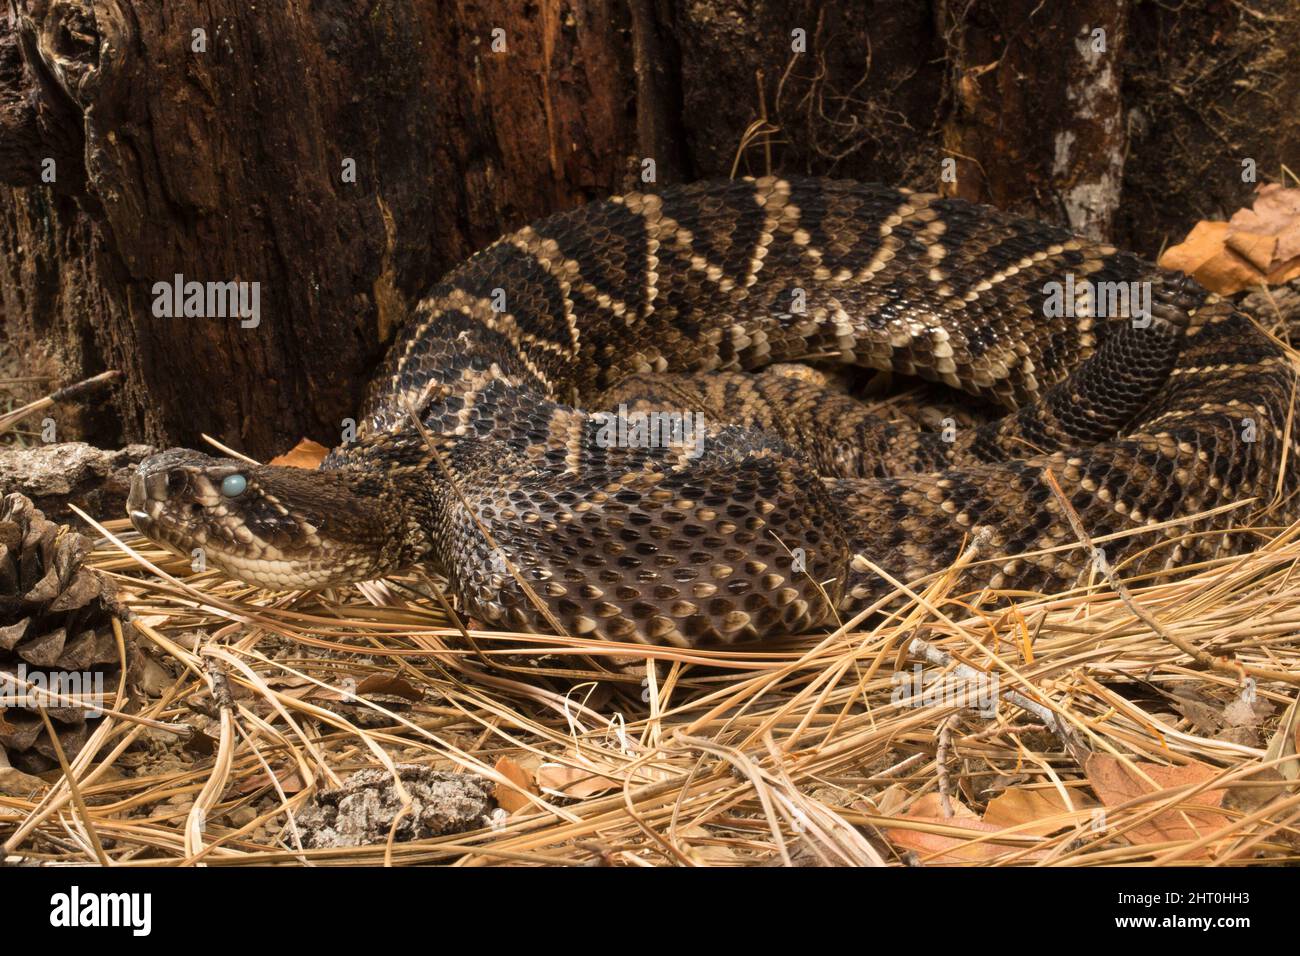 Eastern diamondback rattlesnake (Crotalus adamanteus) frequents pine and oak forests, upland dry pine forest, pine and palmetto flatwoods and coastal Stock Photo